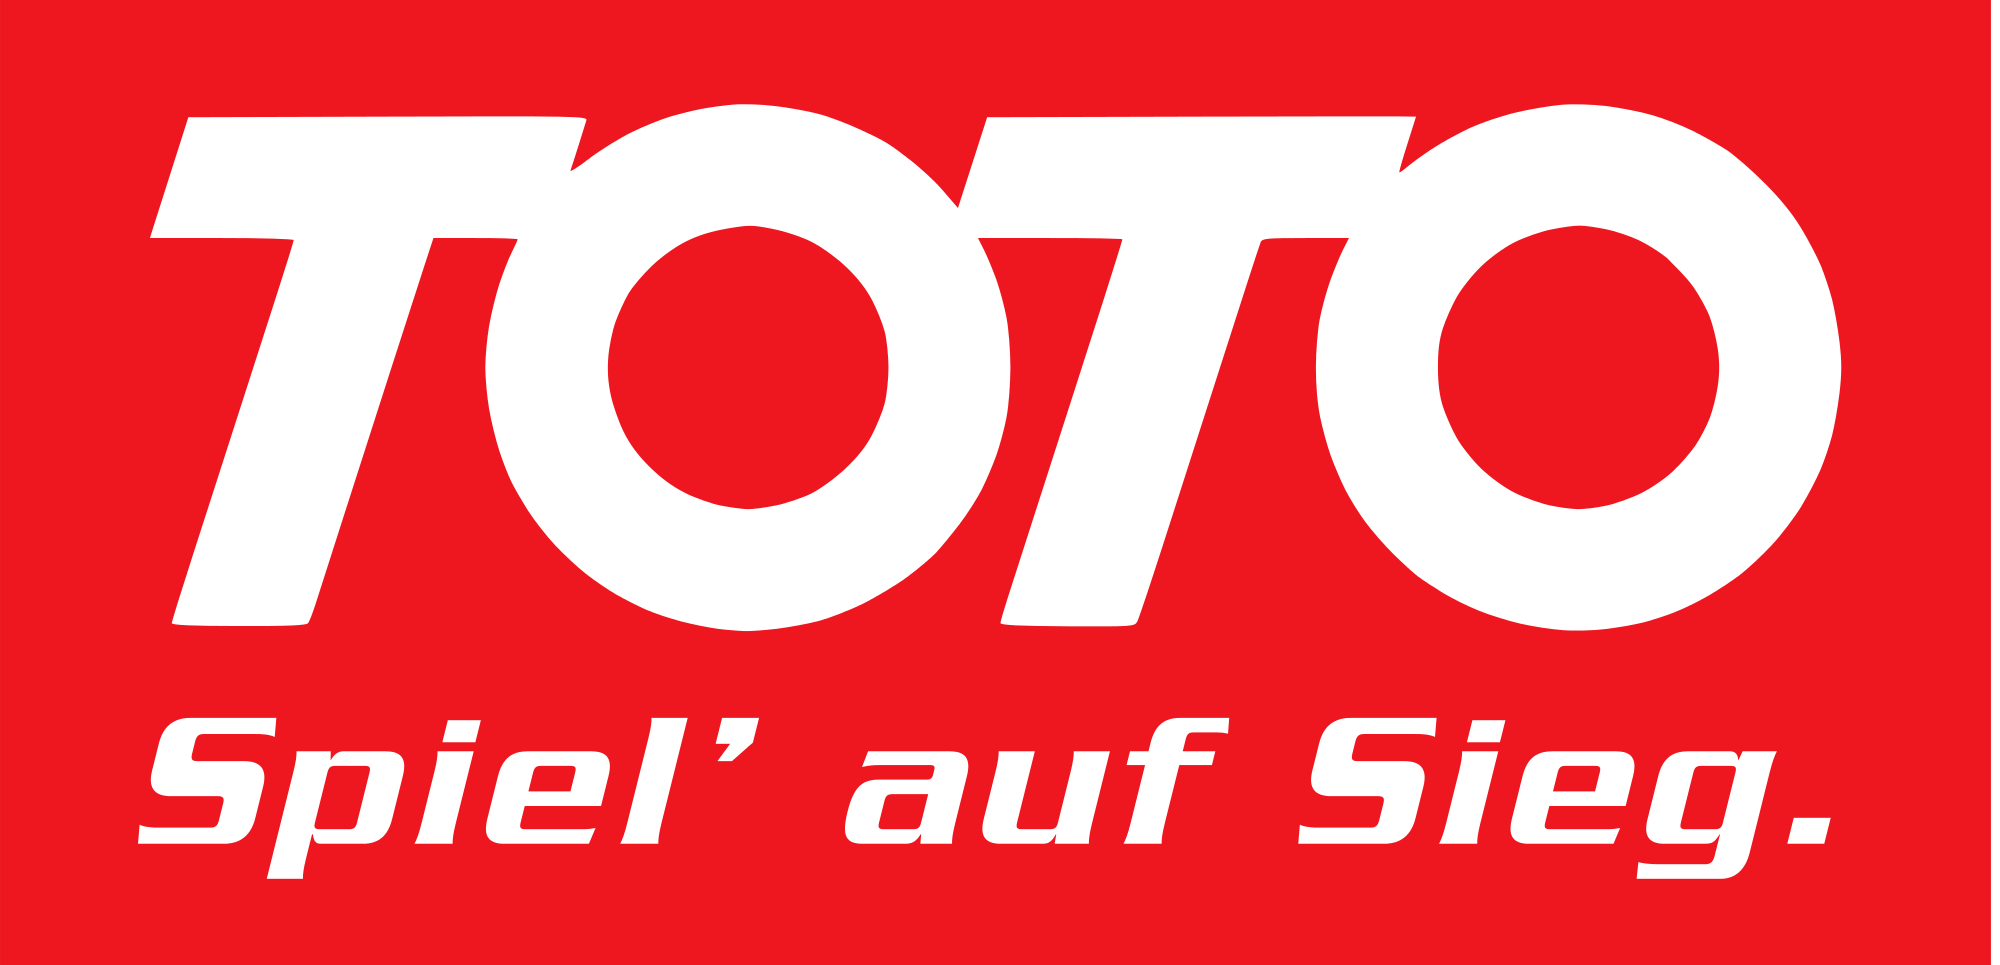 Toto SVG